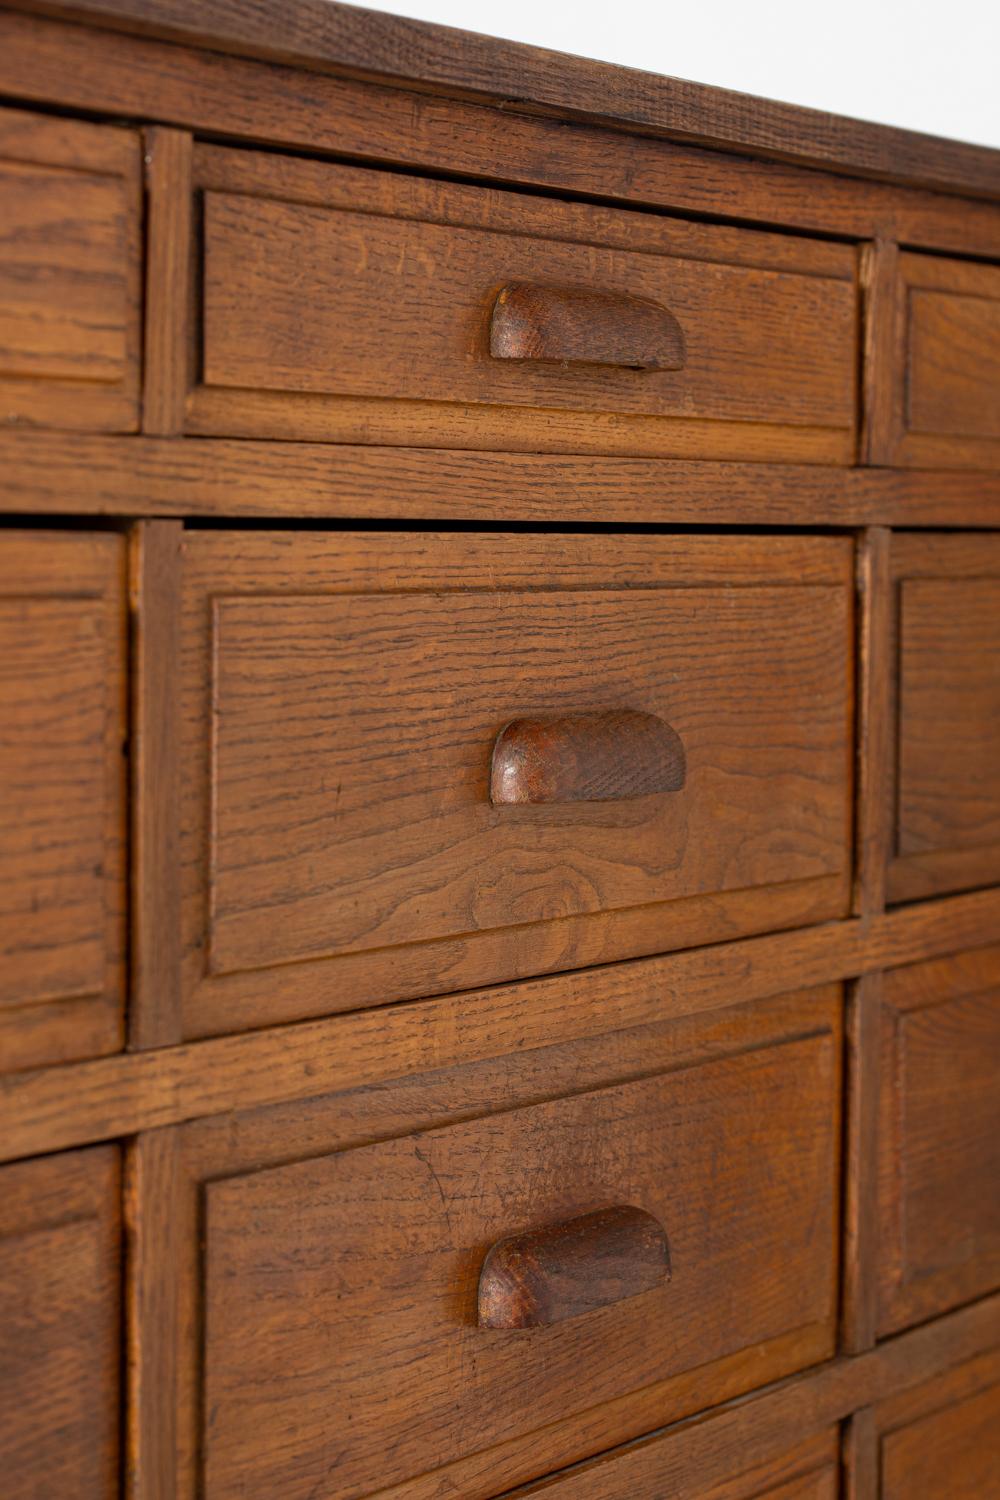 Rare workshop or pharmacy cabinet in solid oak with eighteen drawers, France, circa 1930.